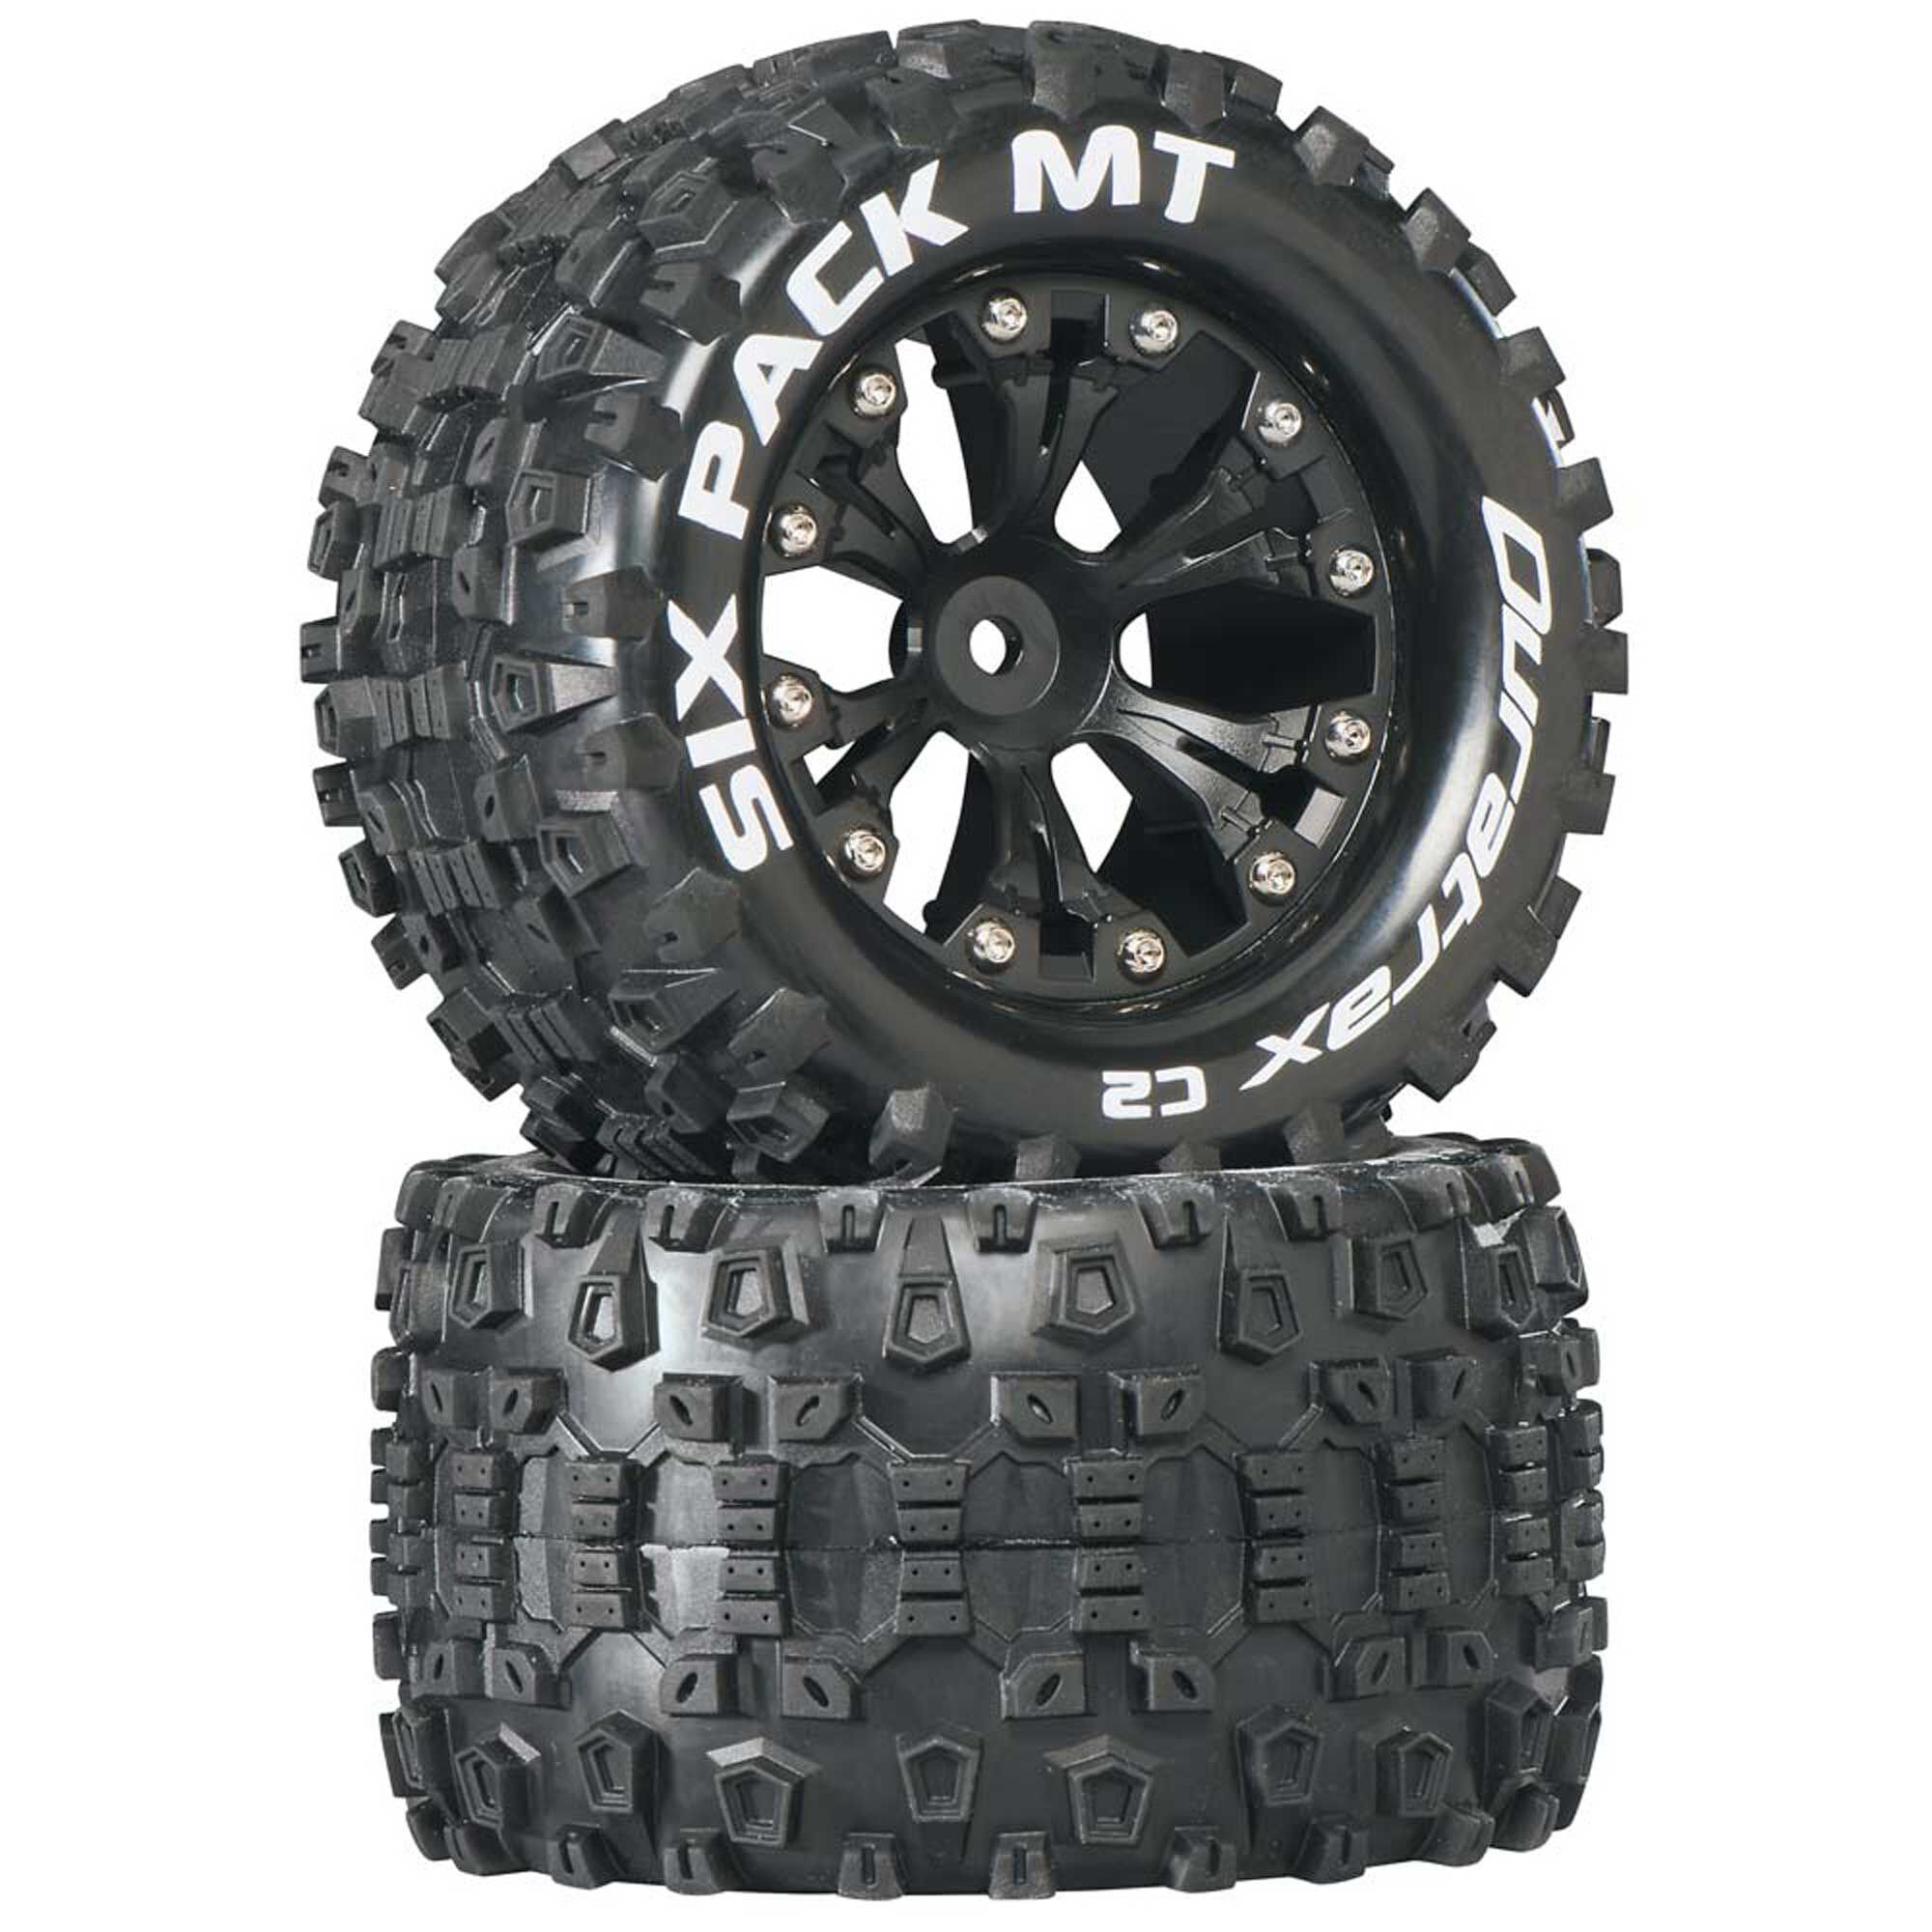 Duratrax Sixpack MT 2.8 Truck 2WD Mounted Front C2 Wheels 2-Piece Black